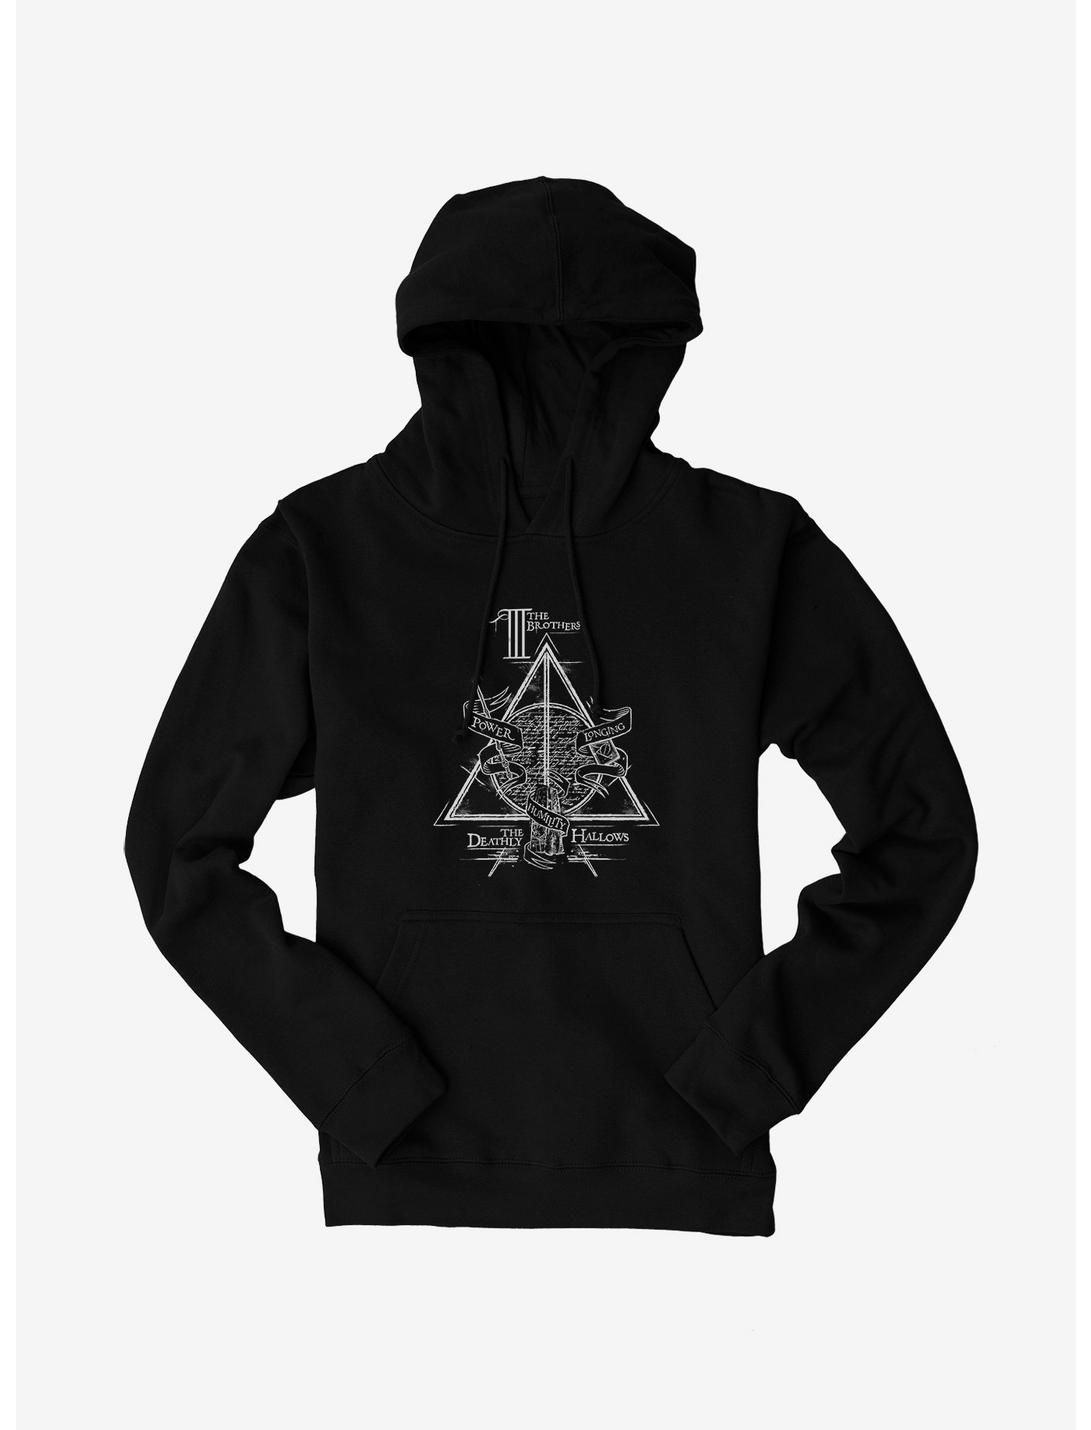 Harry Potter Deathly Hallows Three Brothers Hoodie, BLACK, hi-res